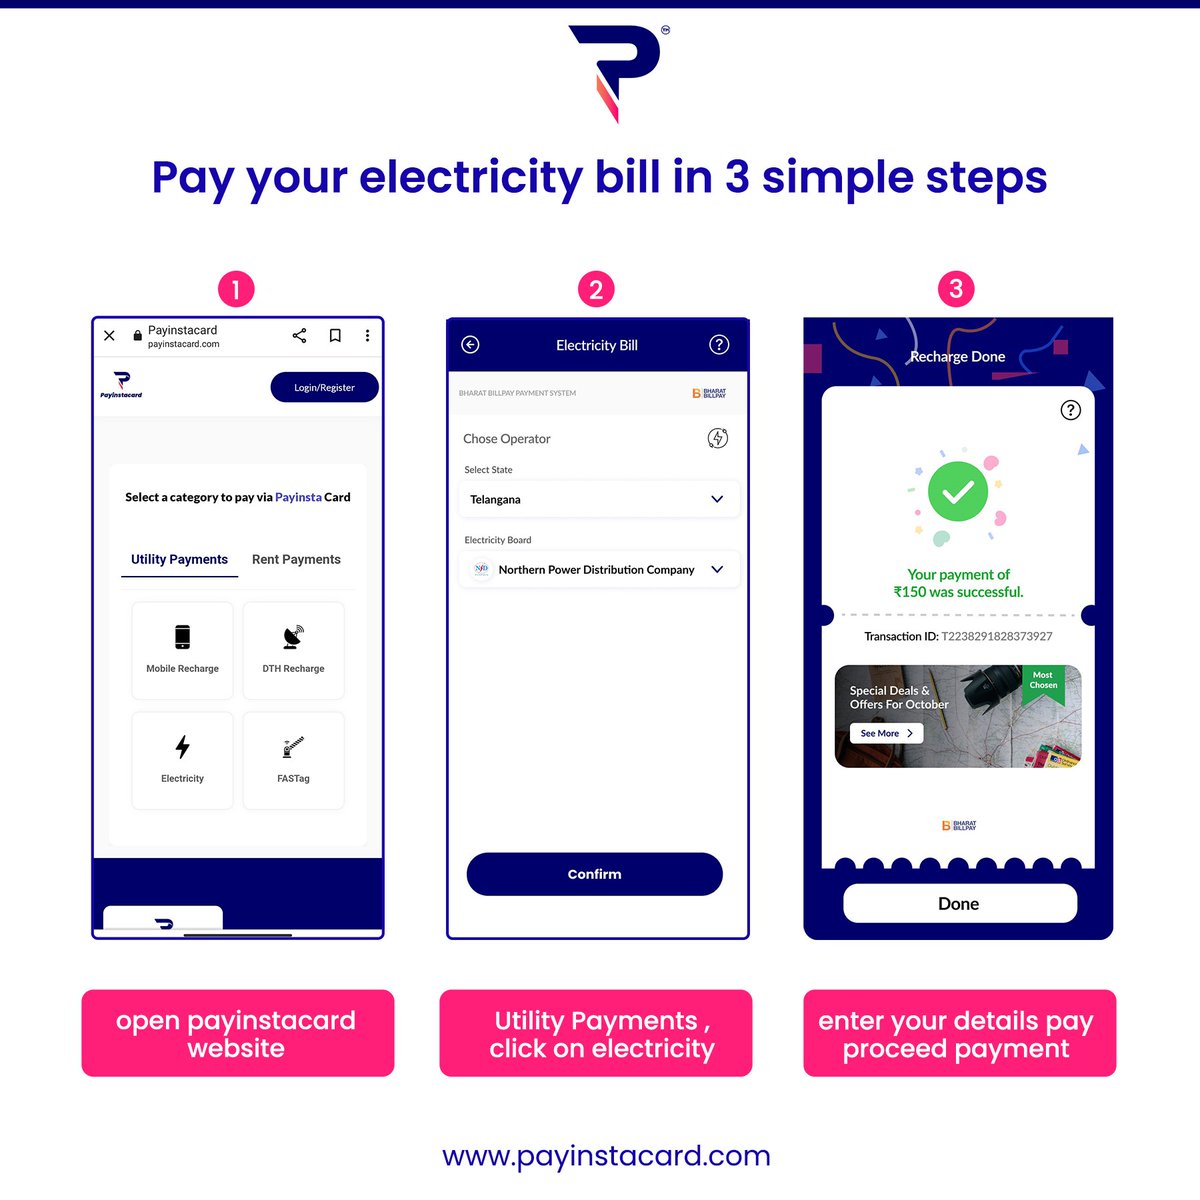 Pay your electricity bill in 3 simple steps.
1. open payinstacard website.
2. Utility payments you can see the electricity click on it.
3.enter your details pay proceed payment.
.
.
.
#payinstacard #EasyPay #recharged #SafeAndEasy #digitalpayments #EasyPayments